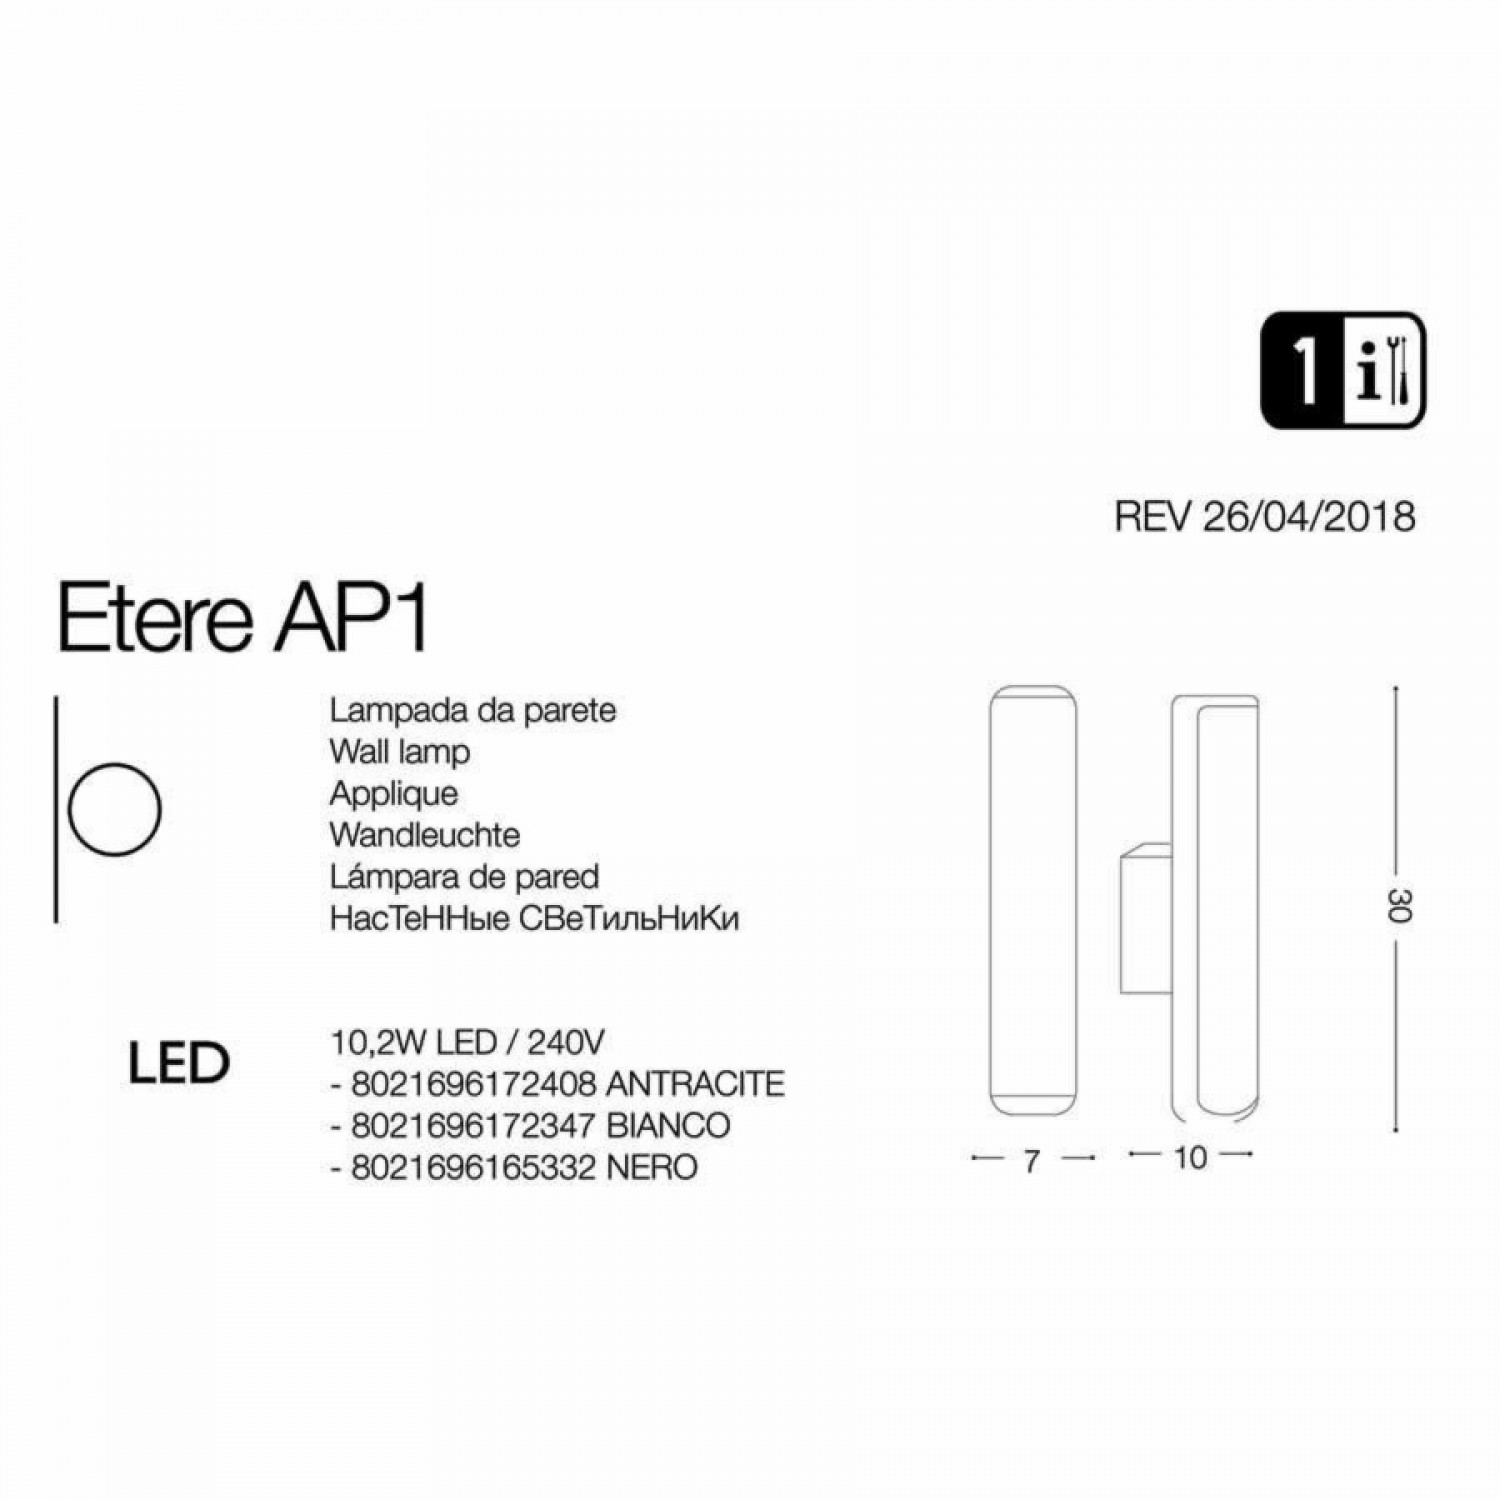 Бра Ideal Lux ETERE AP ANTRACITE 4000K 172408